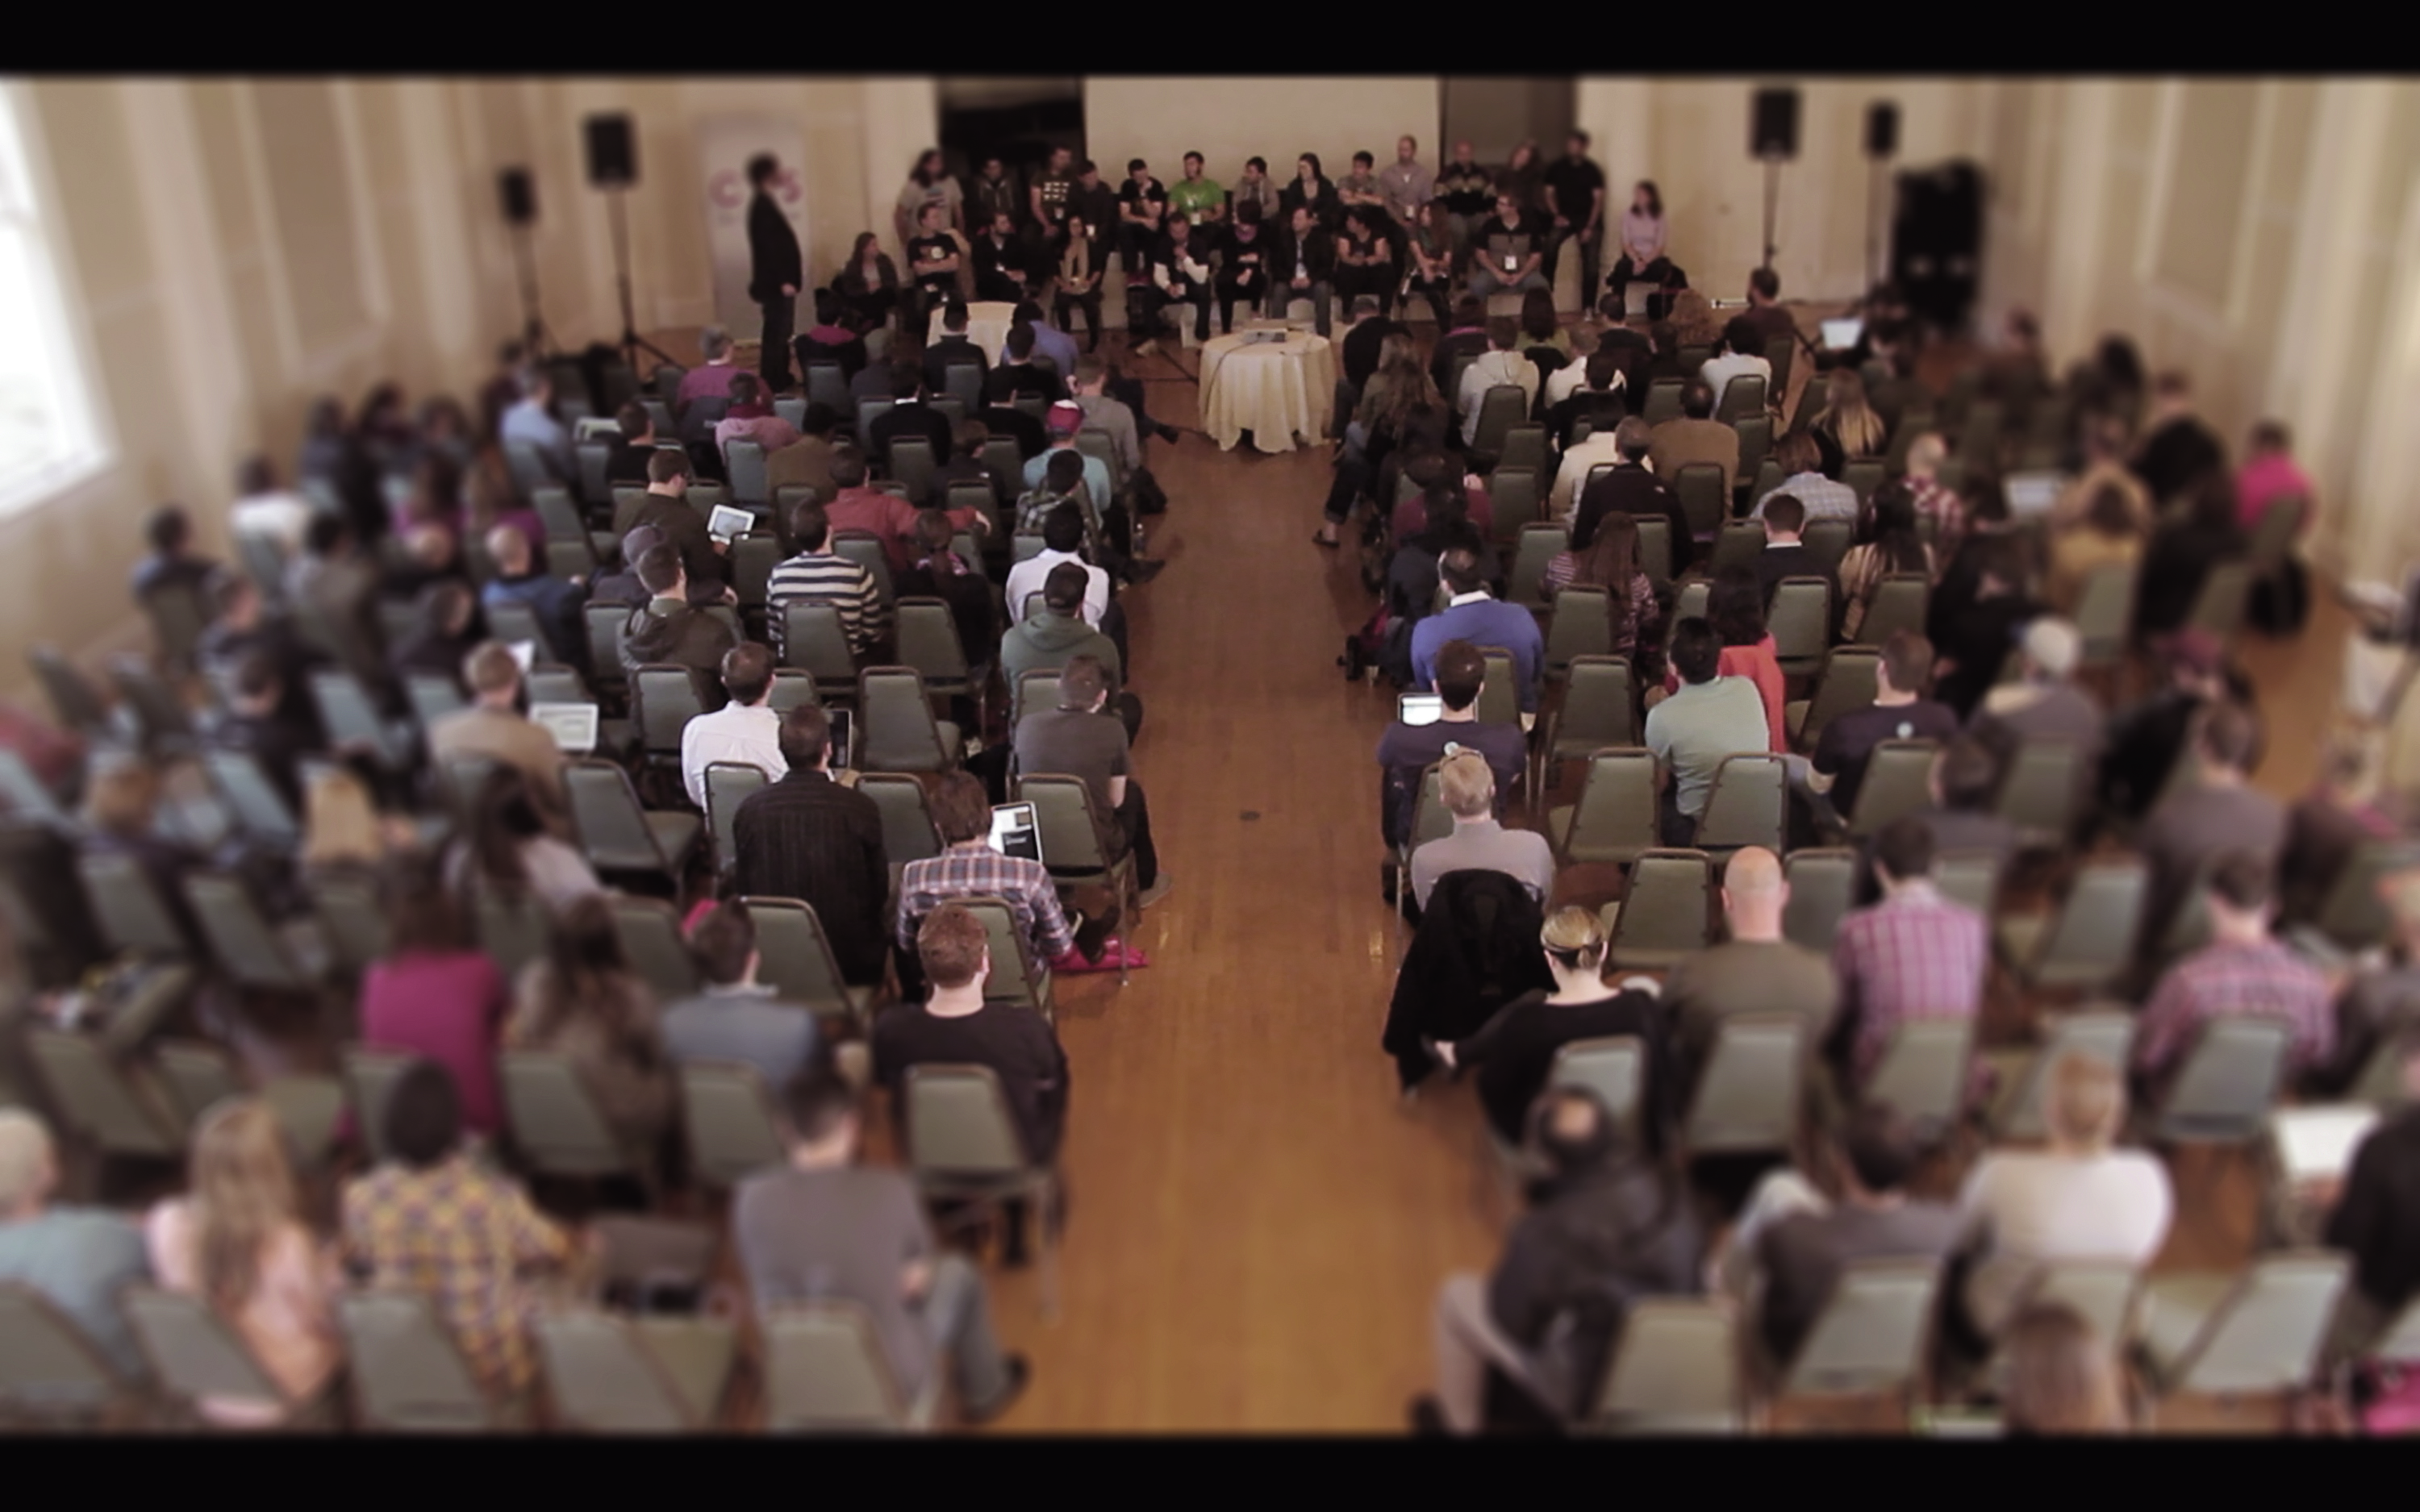 Image from above the crowd at the 2013 CSS Dev Conf in Colorado